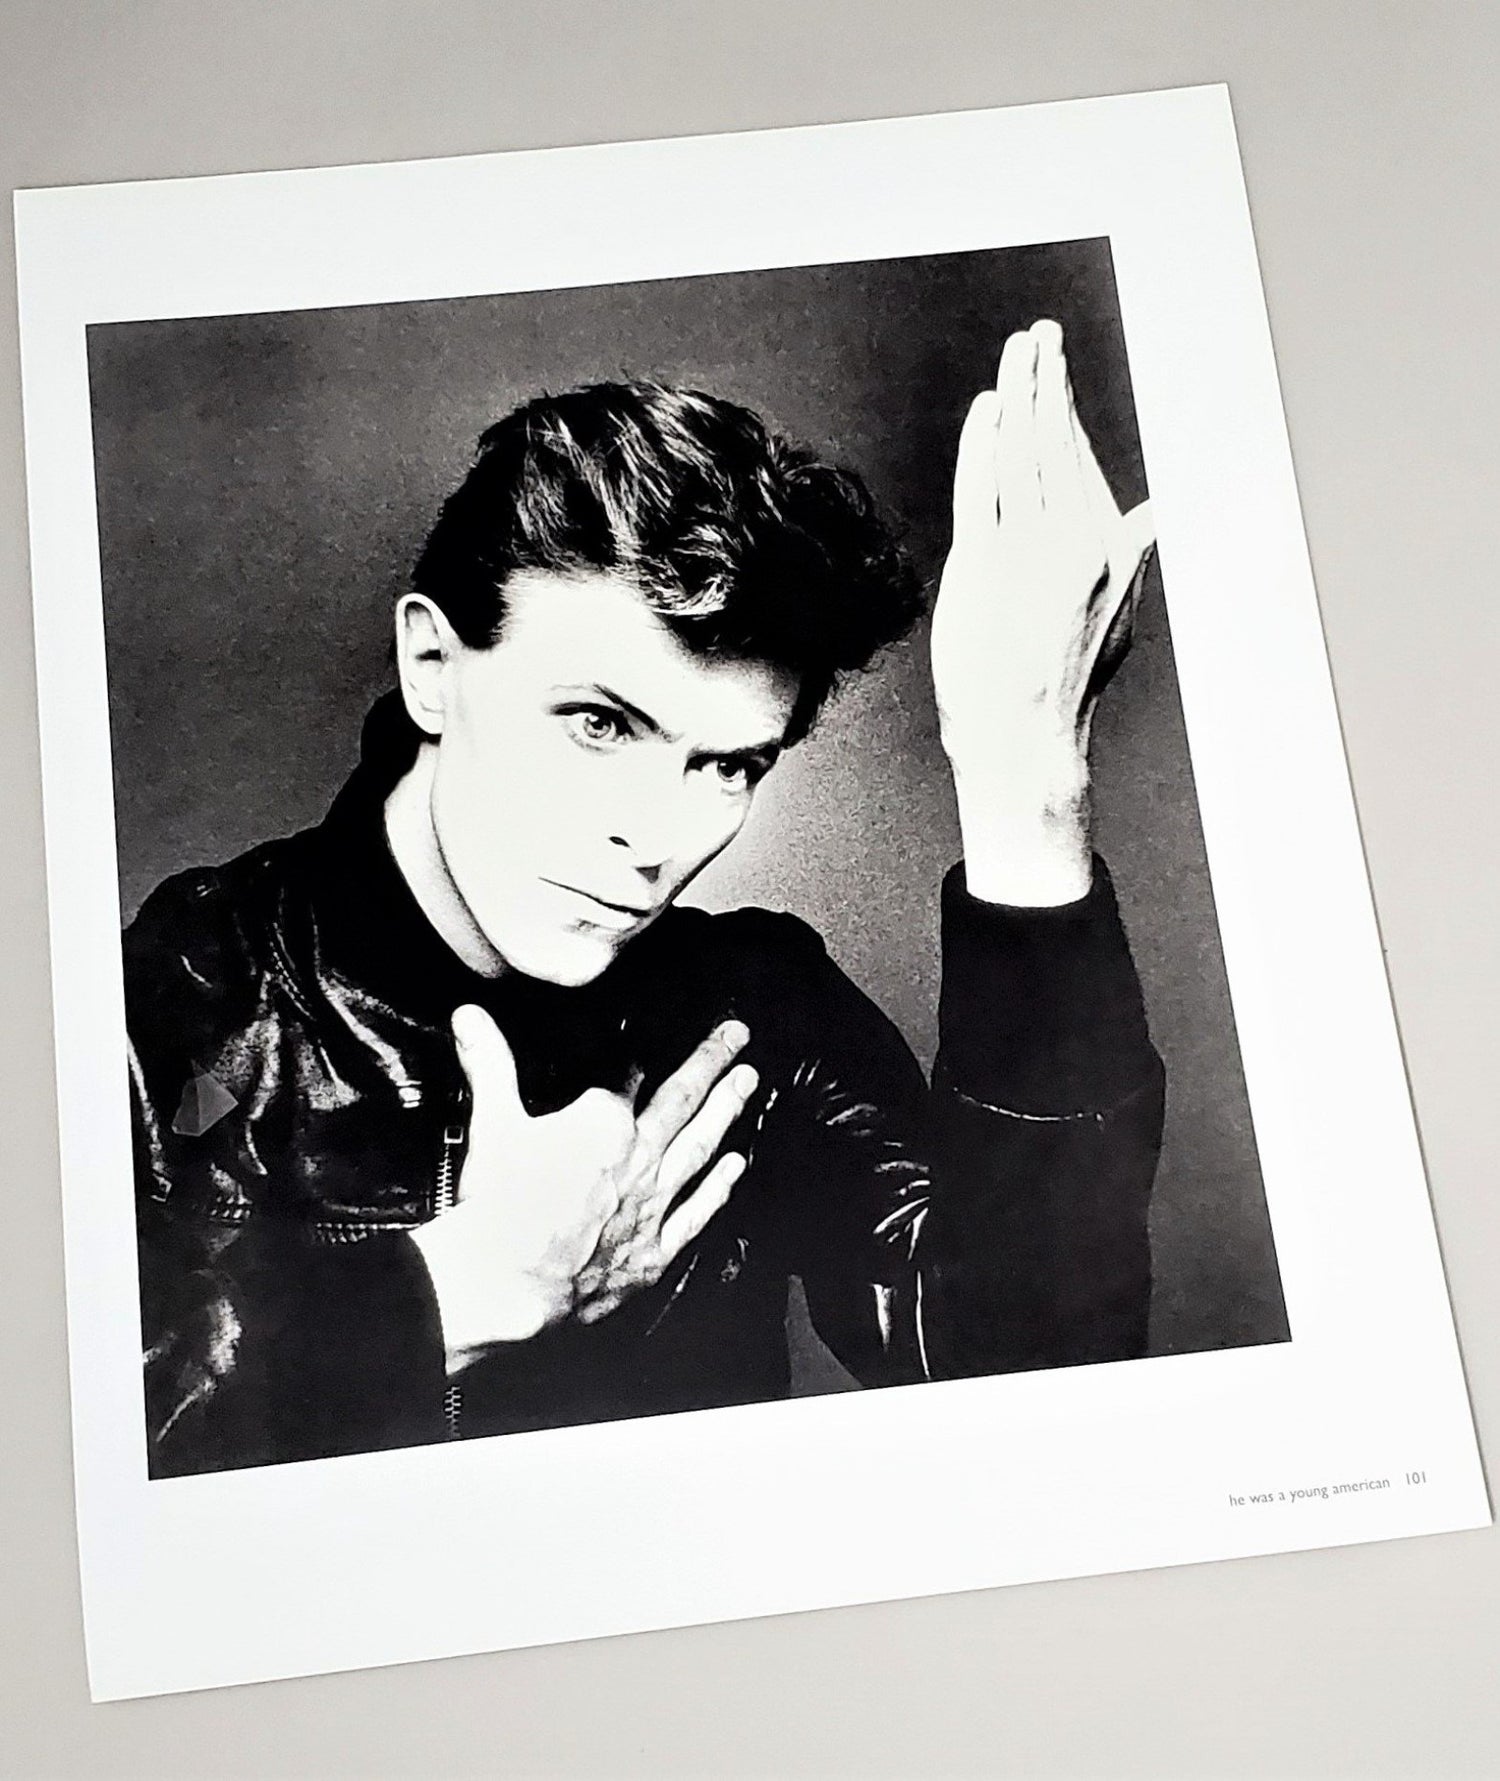 Original Photograph Of Bowie's  Heroes Album Art Featured in 2010 David Bowie book by Jeff Hudson